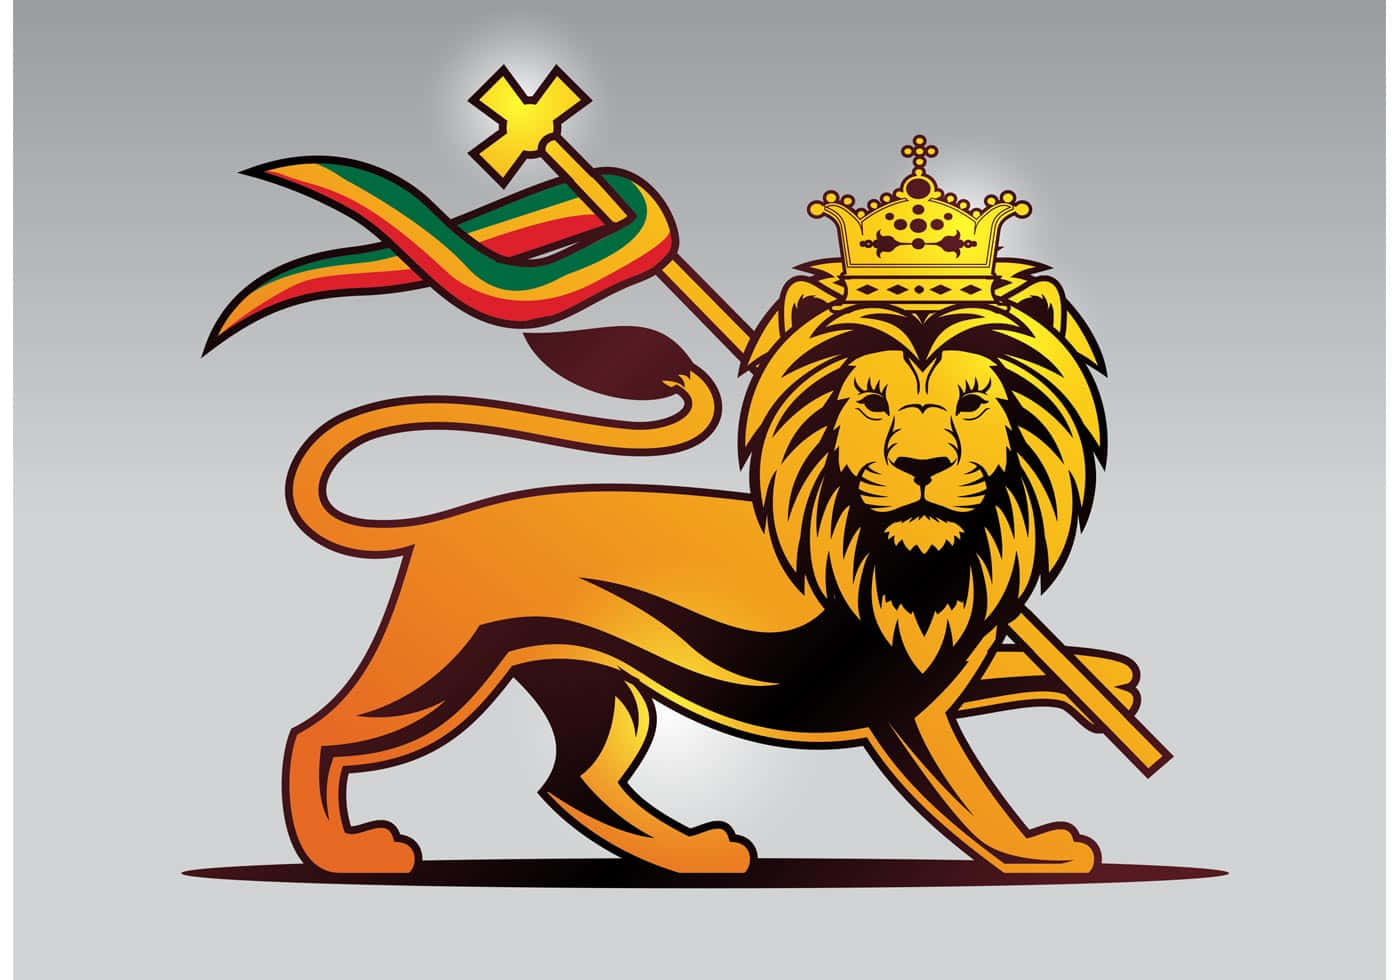 Krafteni Lejonet Av Juda. (this Could Work For A Computer Or Mobile Wallpaper With The Lion Of Judah As A Design.)